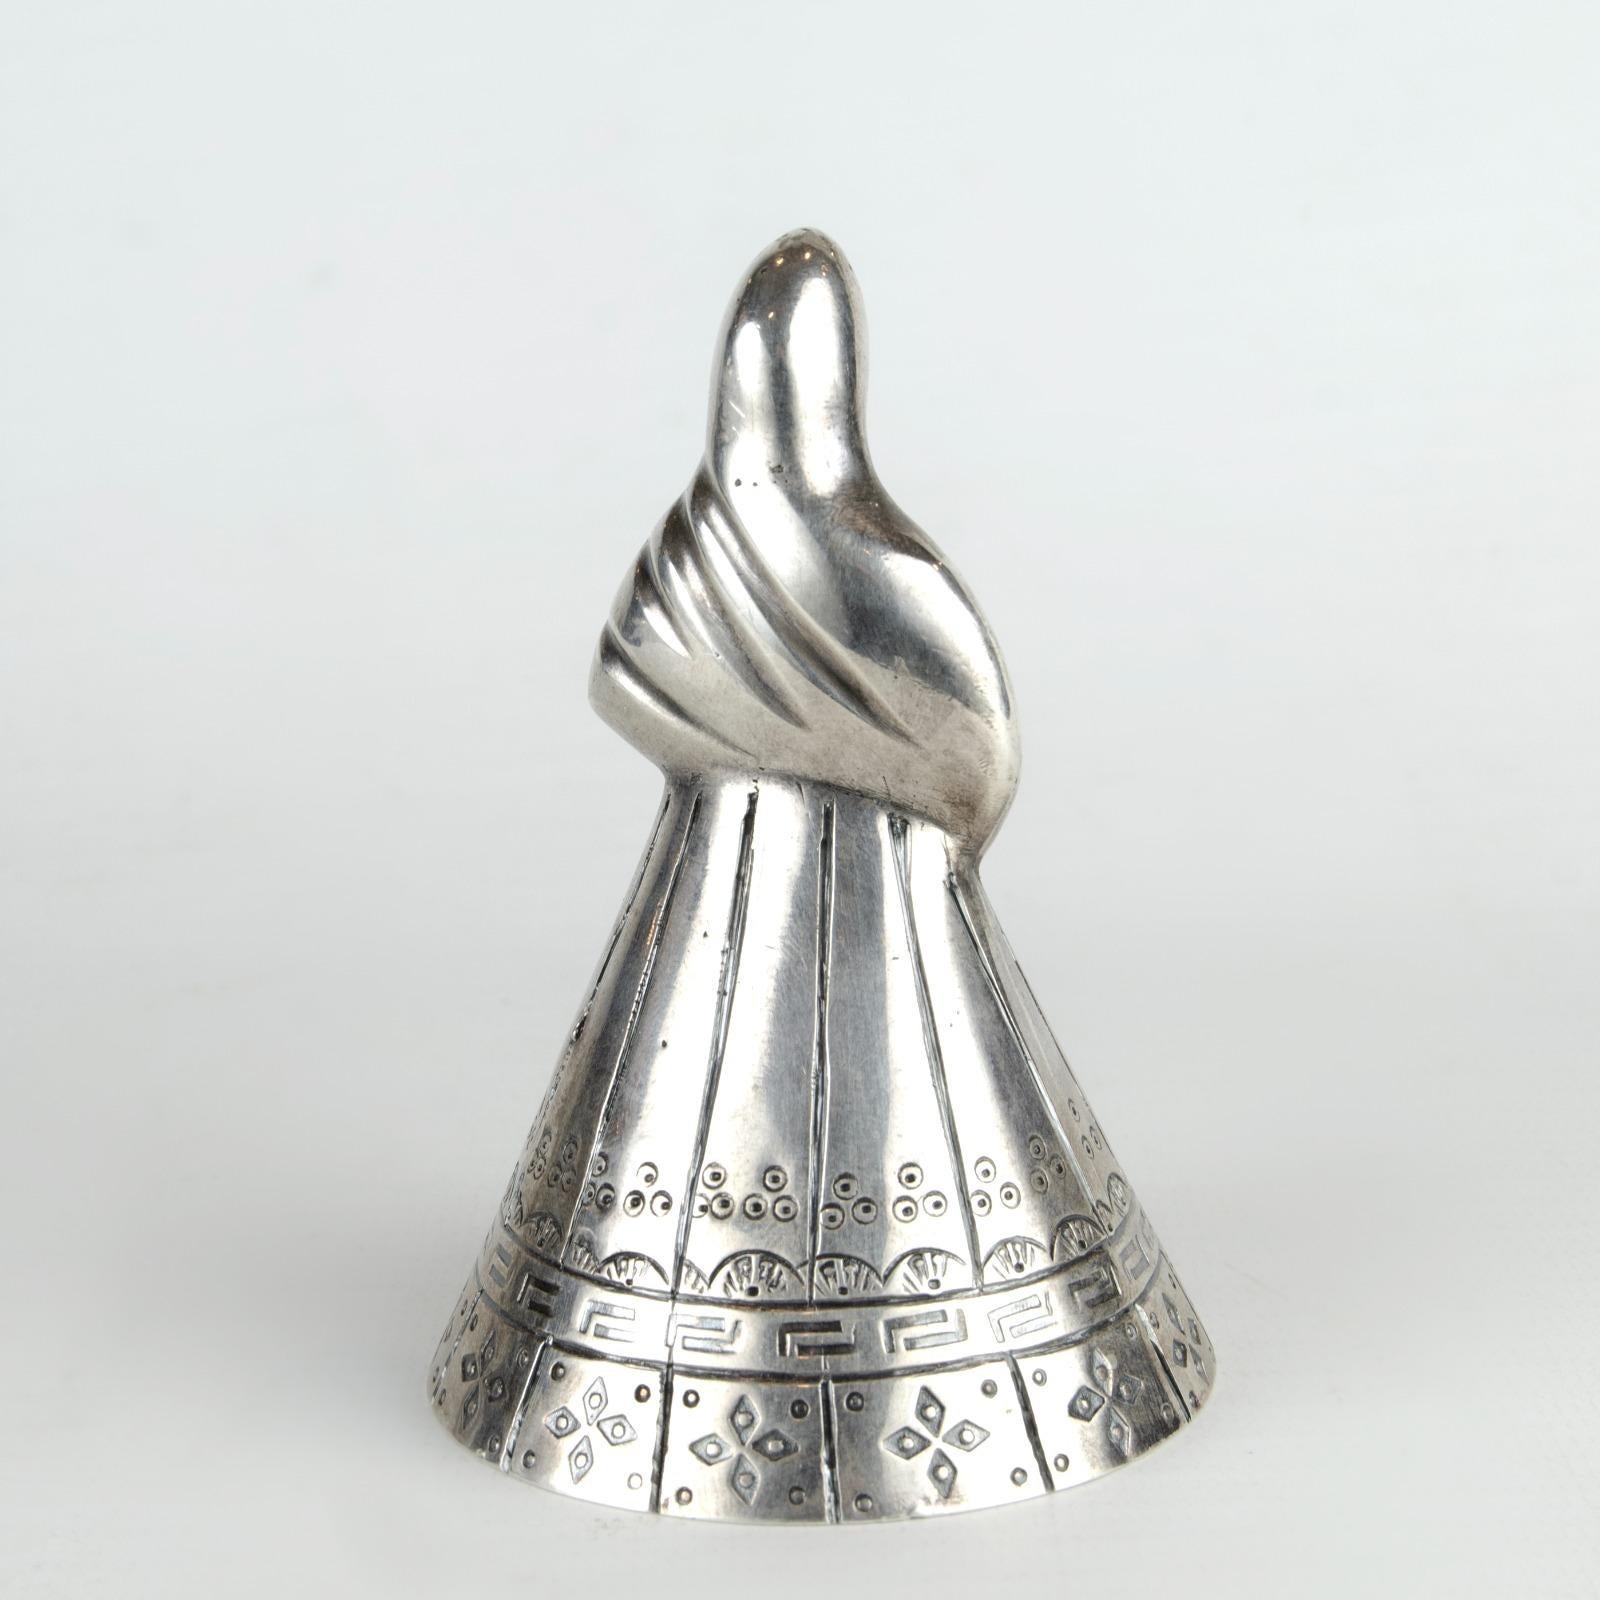                   PERUVIAN 925 SILVER BELL, MID-20TH CENTURY 

     Beautiful Peruvian silver bell of a woman carved in traditional clothing 
                                             stamped by MML

                                             